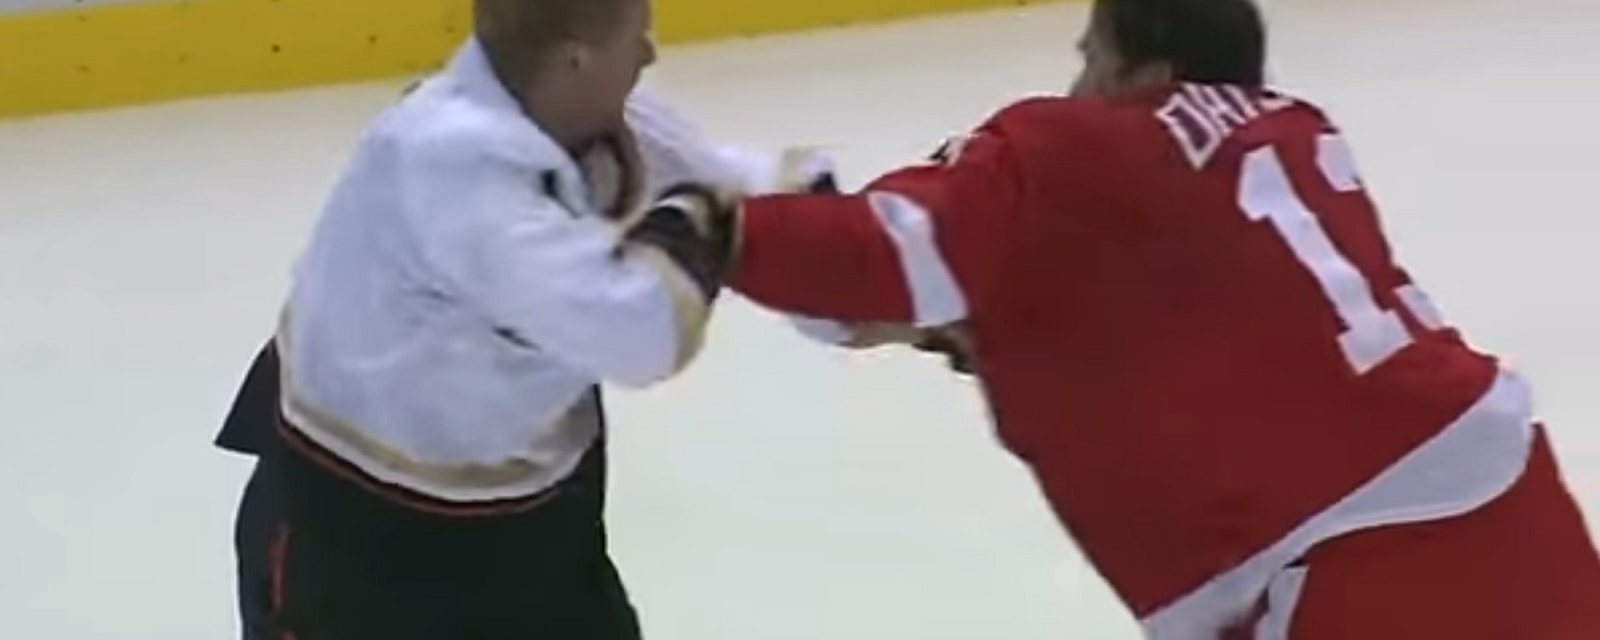 Throwback: Datsyuk drops the gloves with Perry and teaches him a lesson.